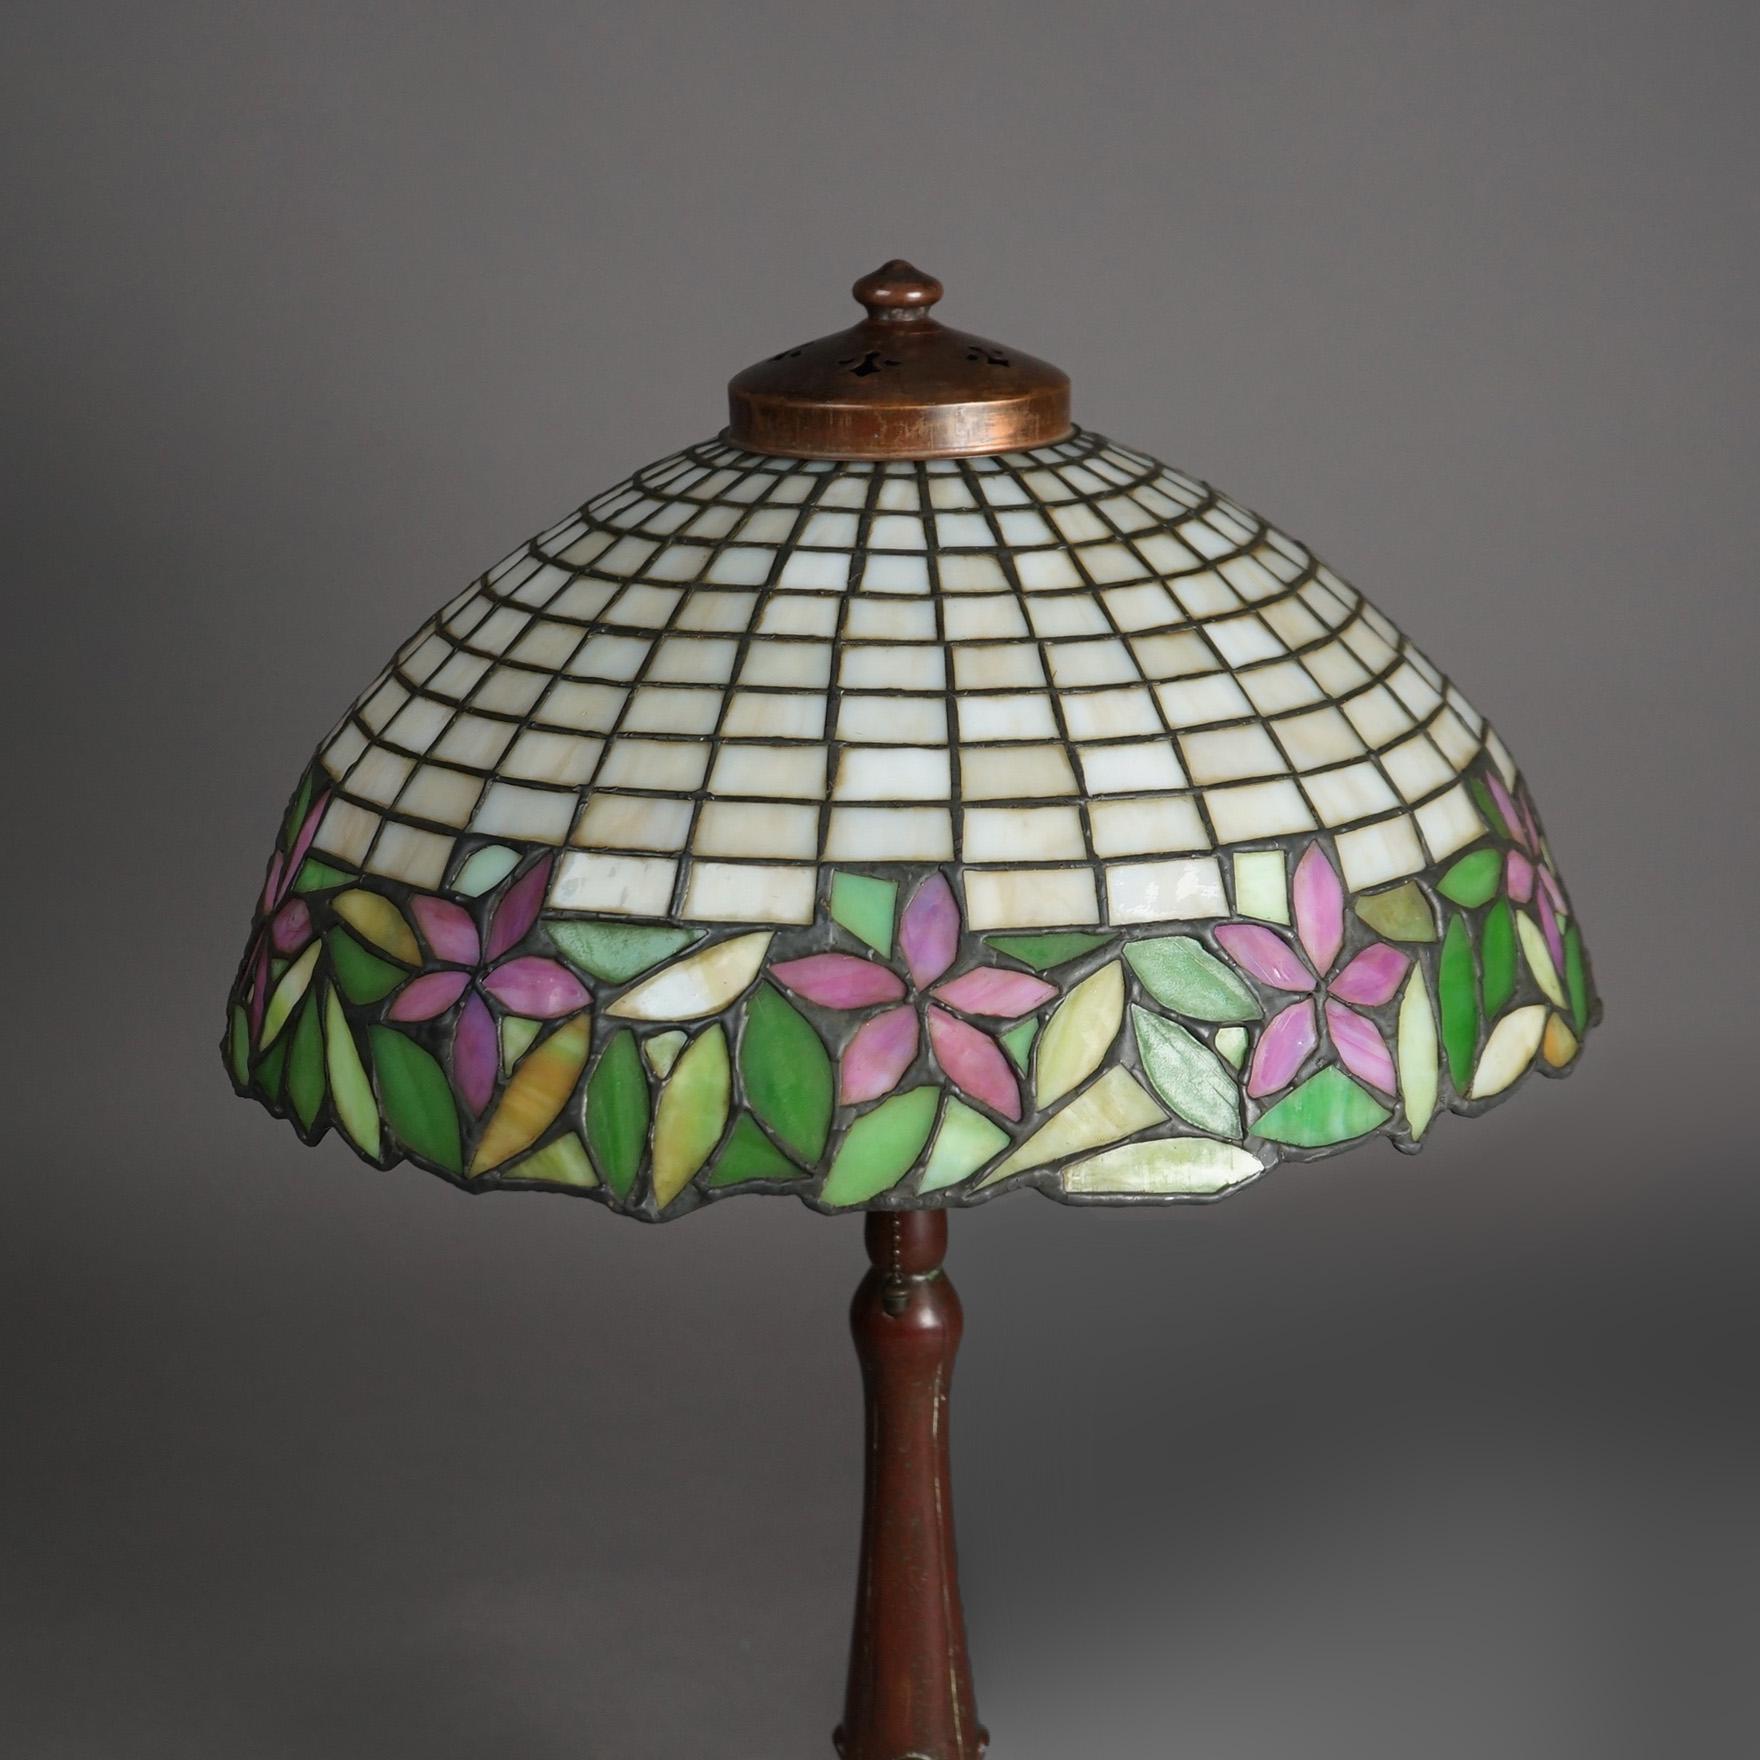 Cast Antique Arts & Crafts Leaded Glass Lamp With Unique Shade & Handel Base c1920